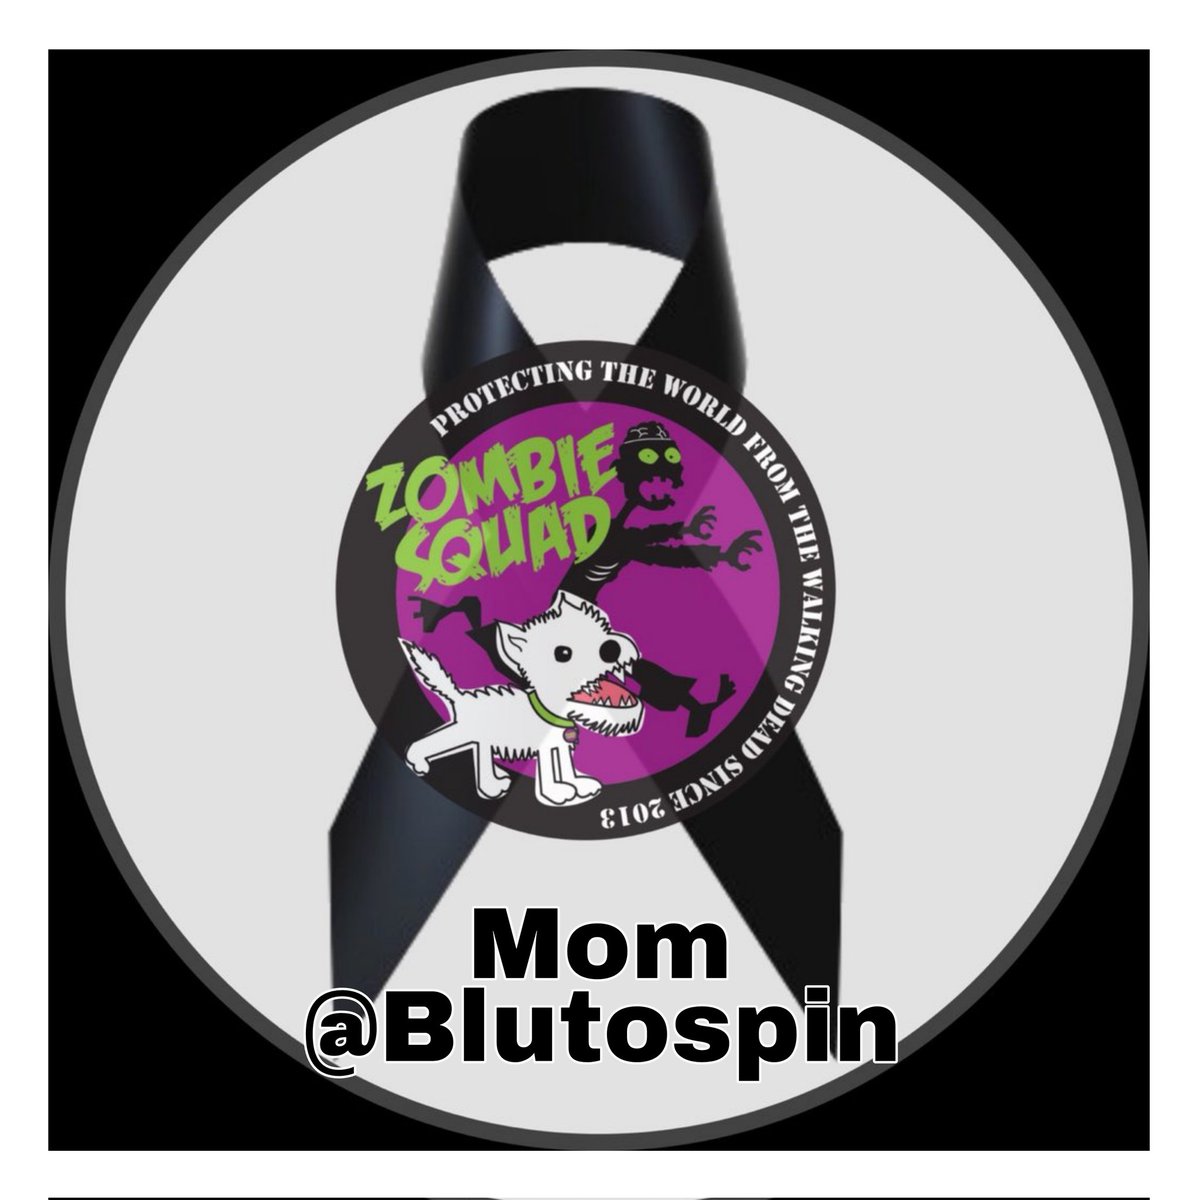 Today we lost @Blutospin Mom, Rose. We are 💔 over this loss. Those that chat with the Bruizzers frequently knew her as #supahmomz she had been thru so much in recent years. We sending love to the Bruizzers, Pops, and Doc Fetus and the rest of the family during this time #ZSHQ